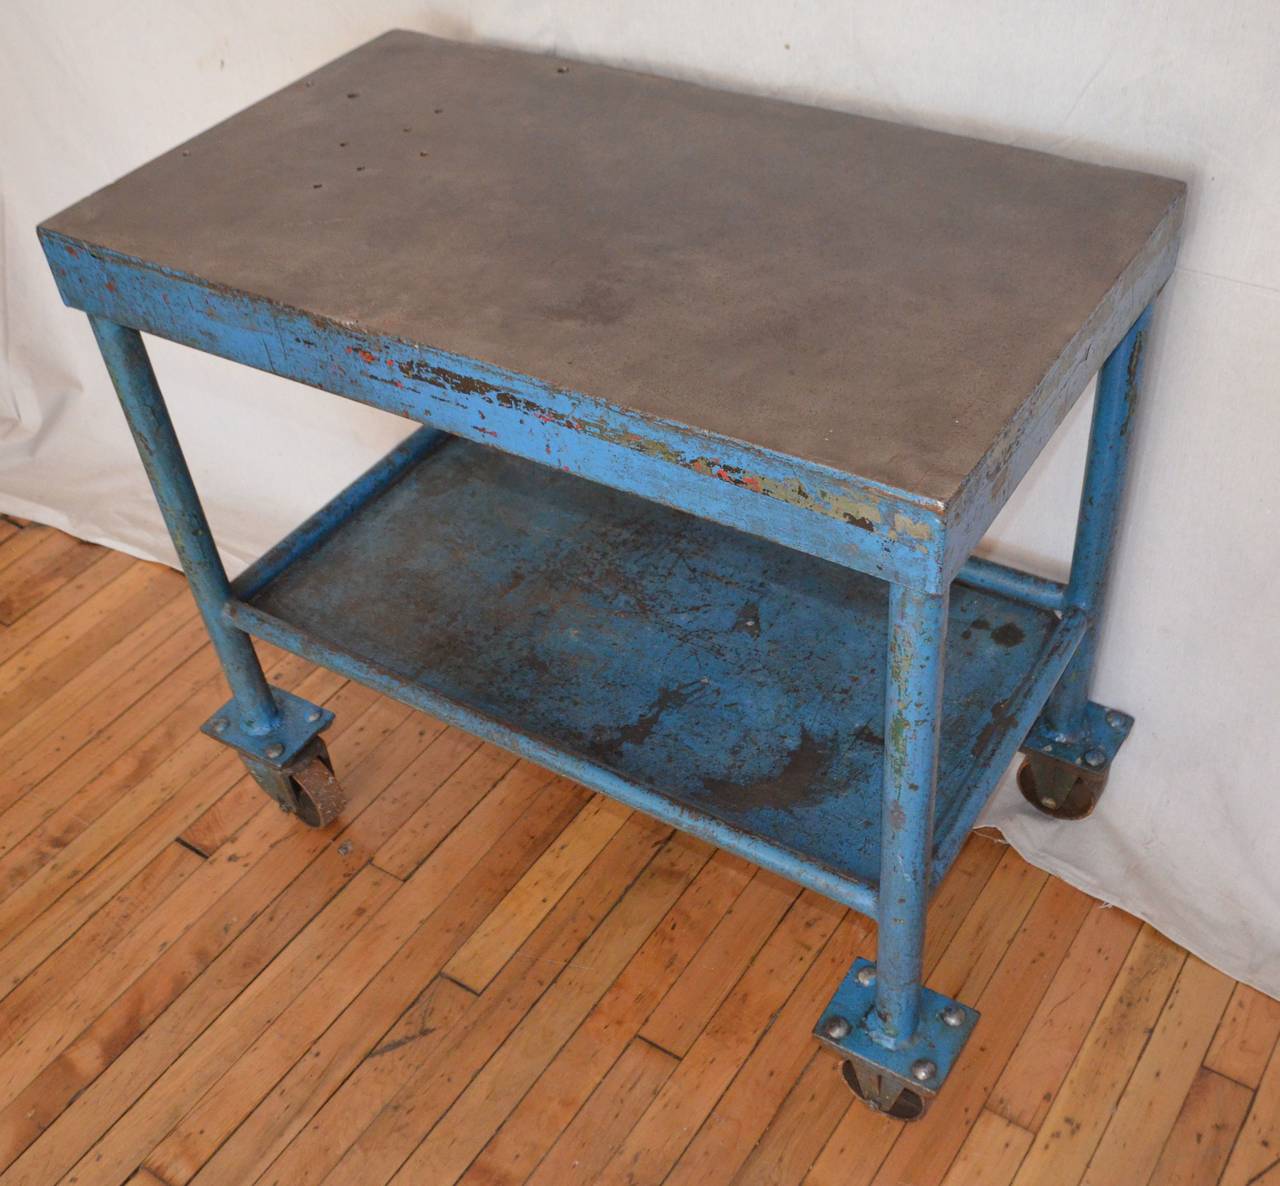 Strength and beautify collide to present a service cart that is as unique as it is functional. As-found, blue-painted steel with two levels for storage and service. On wheels for convenience and ease of movement. Cleaned and sealed to preserve its